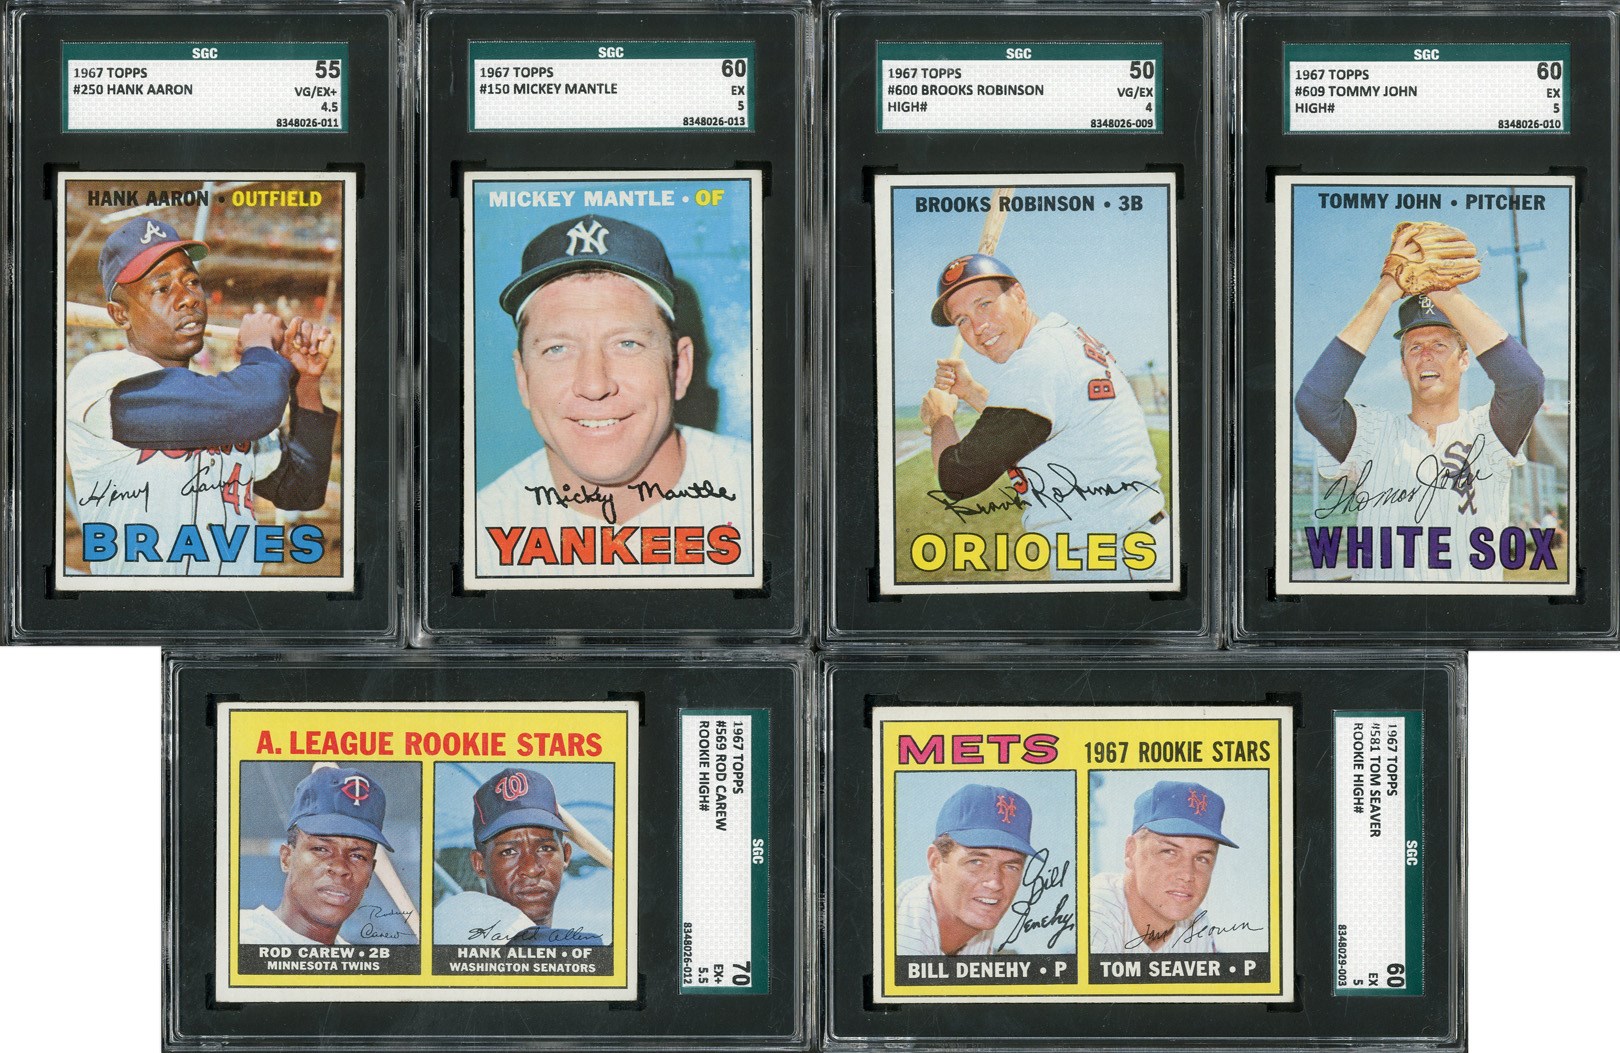 1967 Topps Complete Set of 609 Cards (6 SGC Graded)